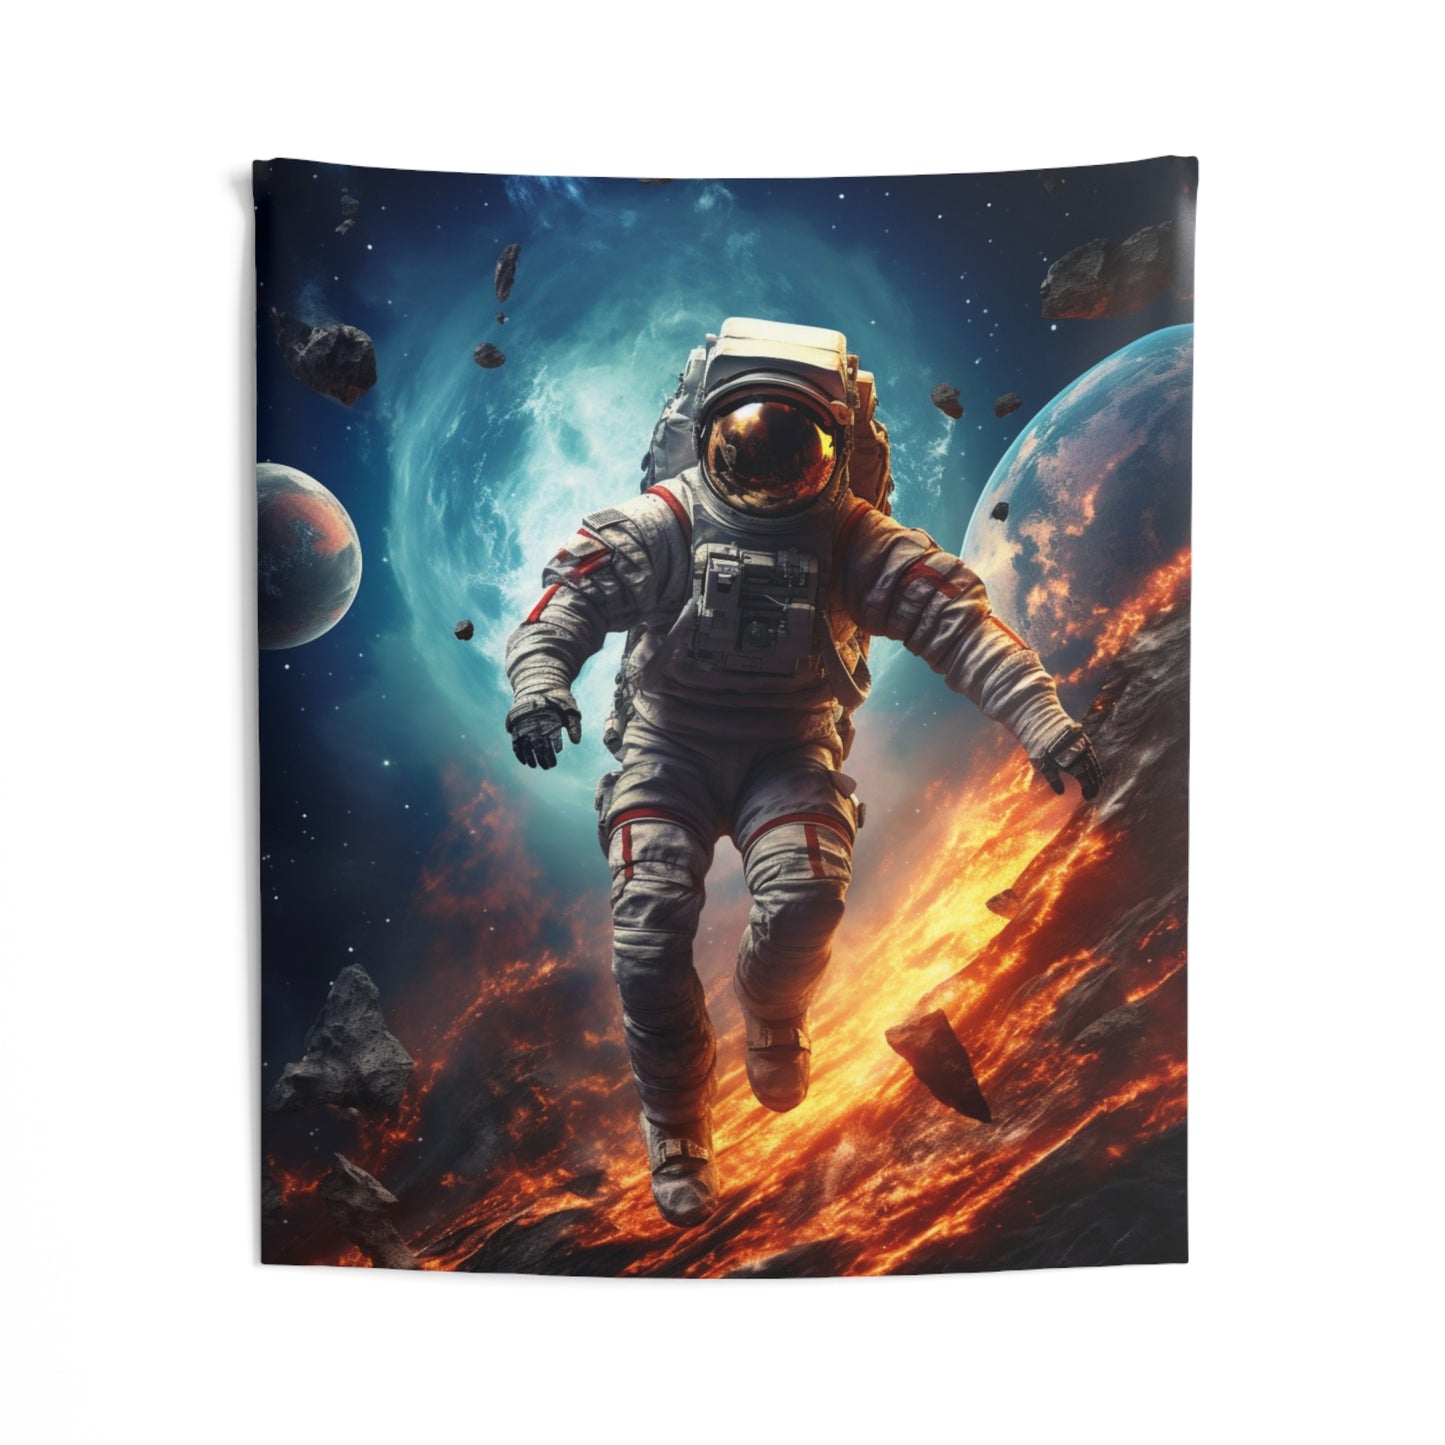 Astronaut Tapestry, Galaxy Outer Space Planets Wall Art Hanging Cool Unique Vertical Aesthetic Large Small Decor Bedroom College Dorm Room Starcove Fashion